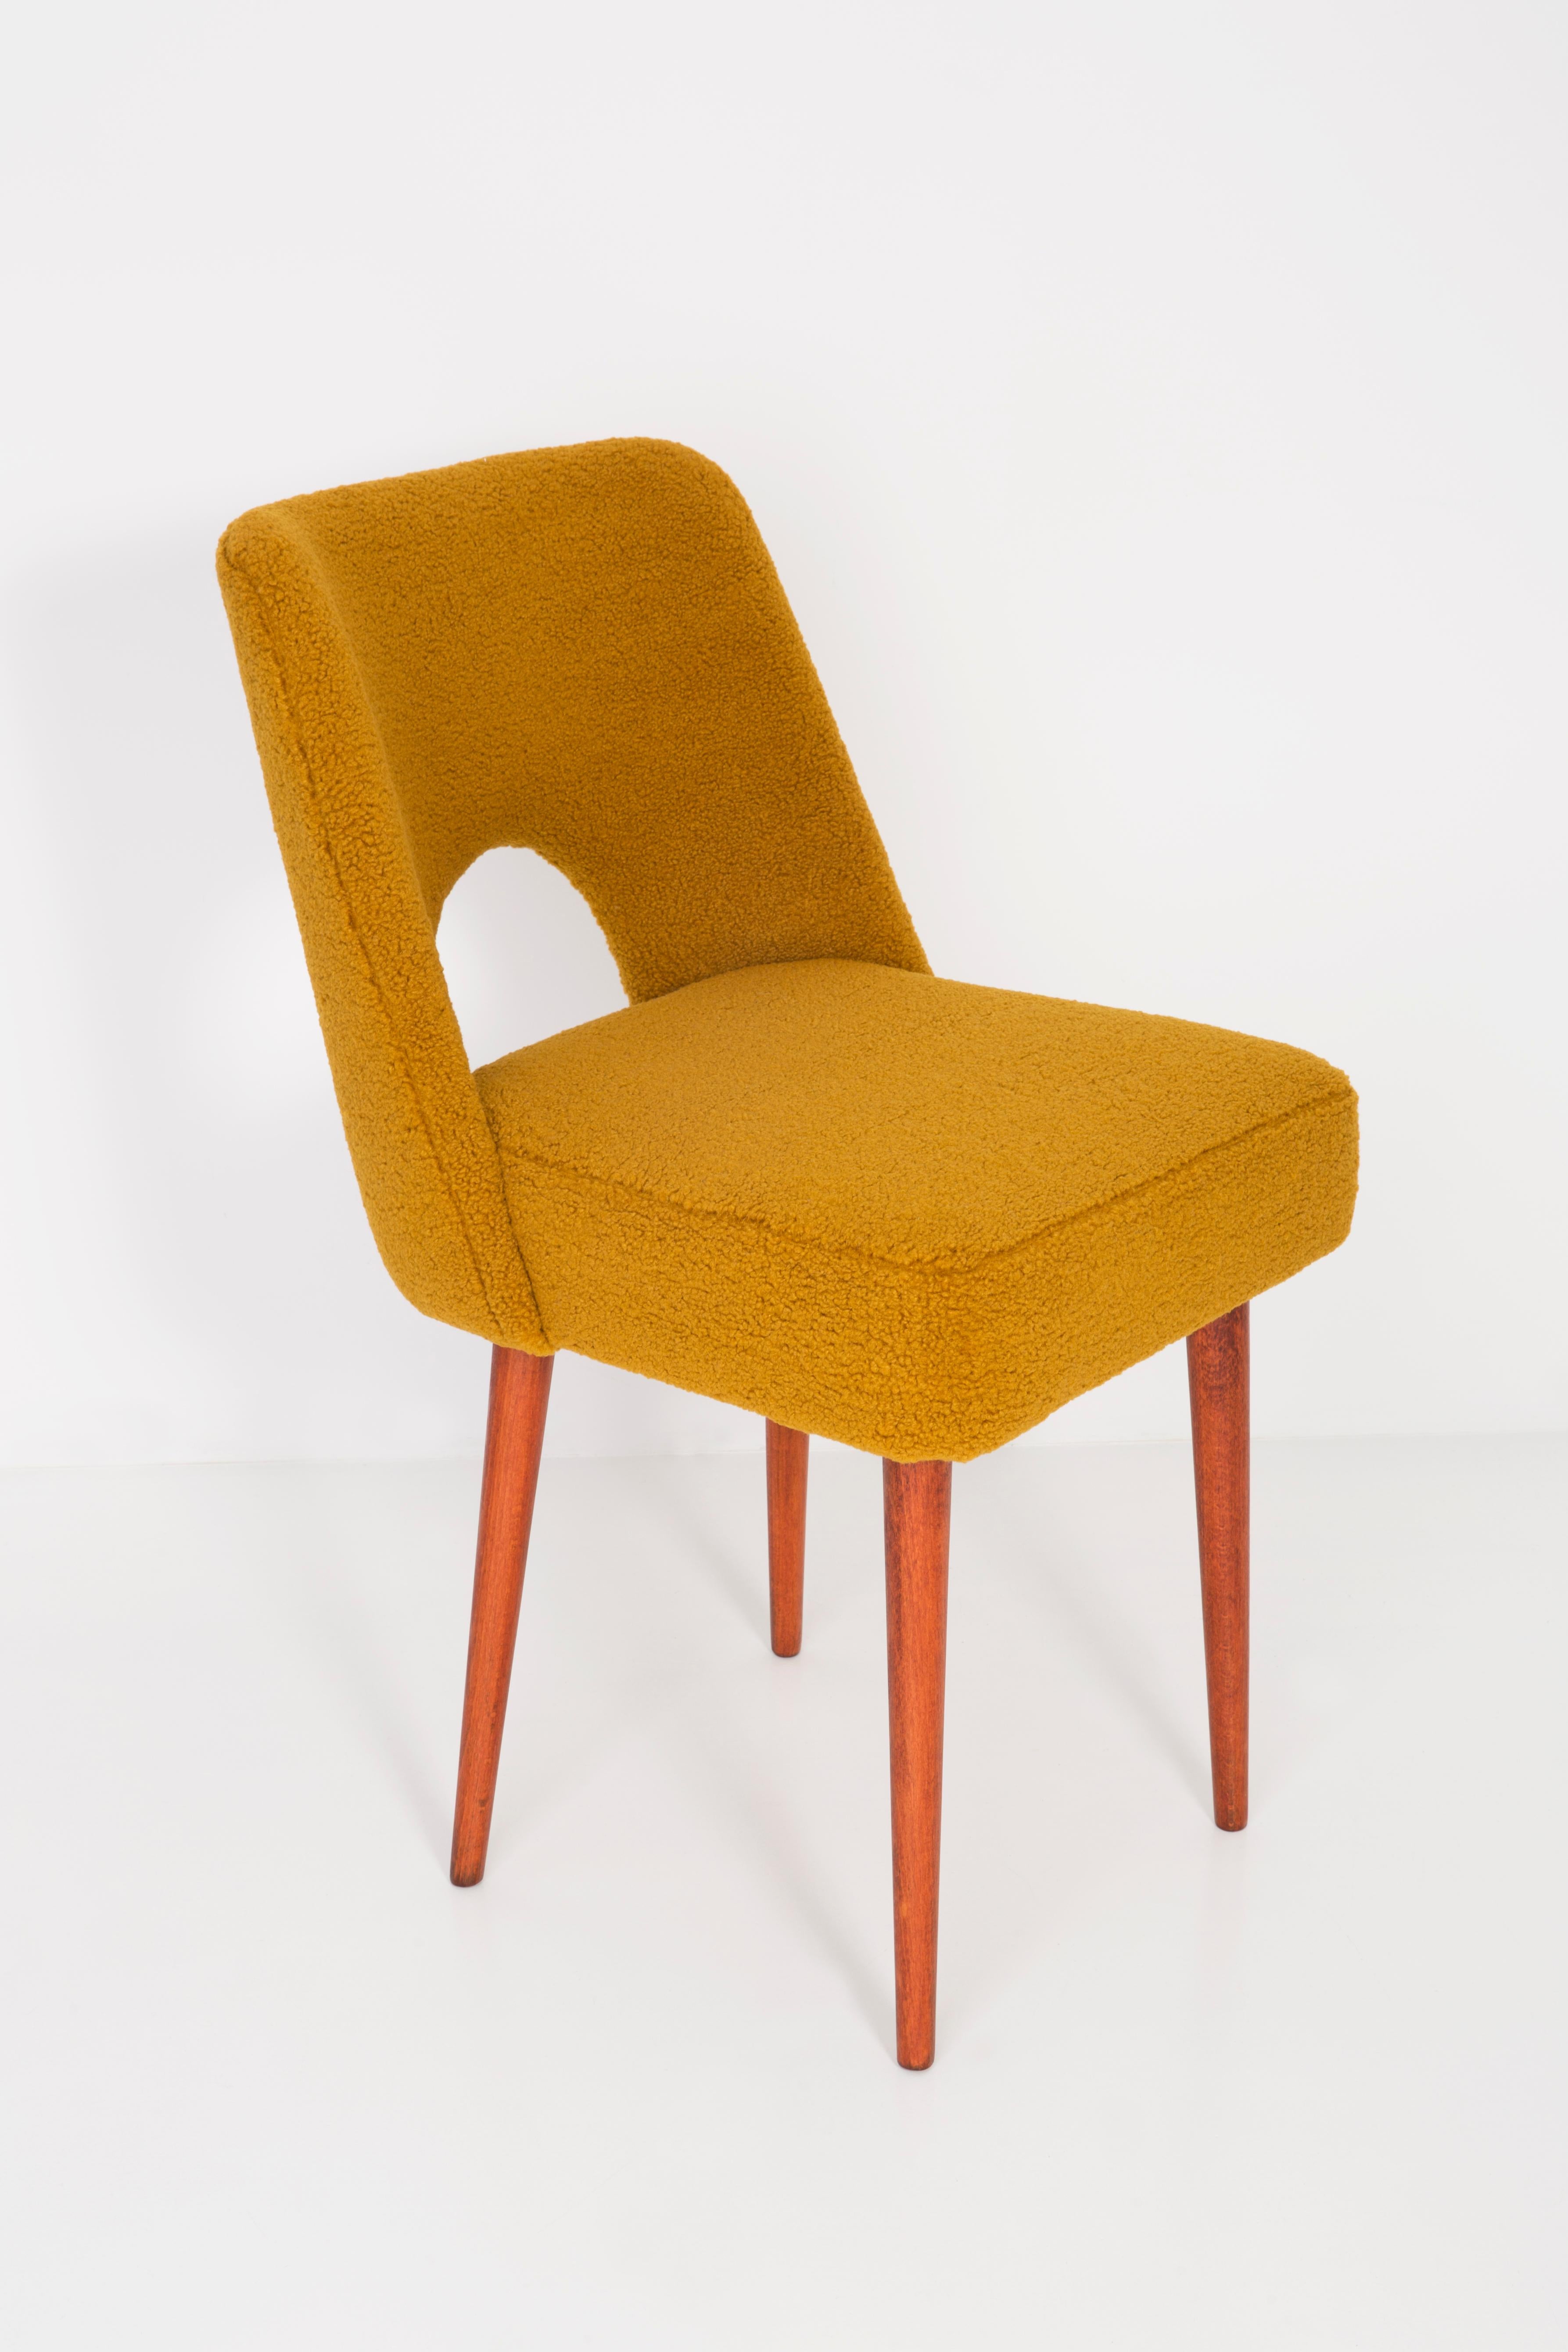 Set of Four Yellow Ochre Boucle 'Shell' Chairs, 1960s For Sale 1